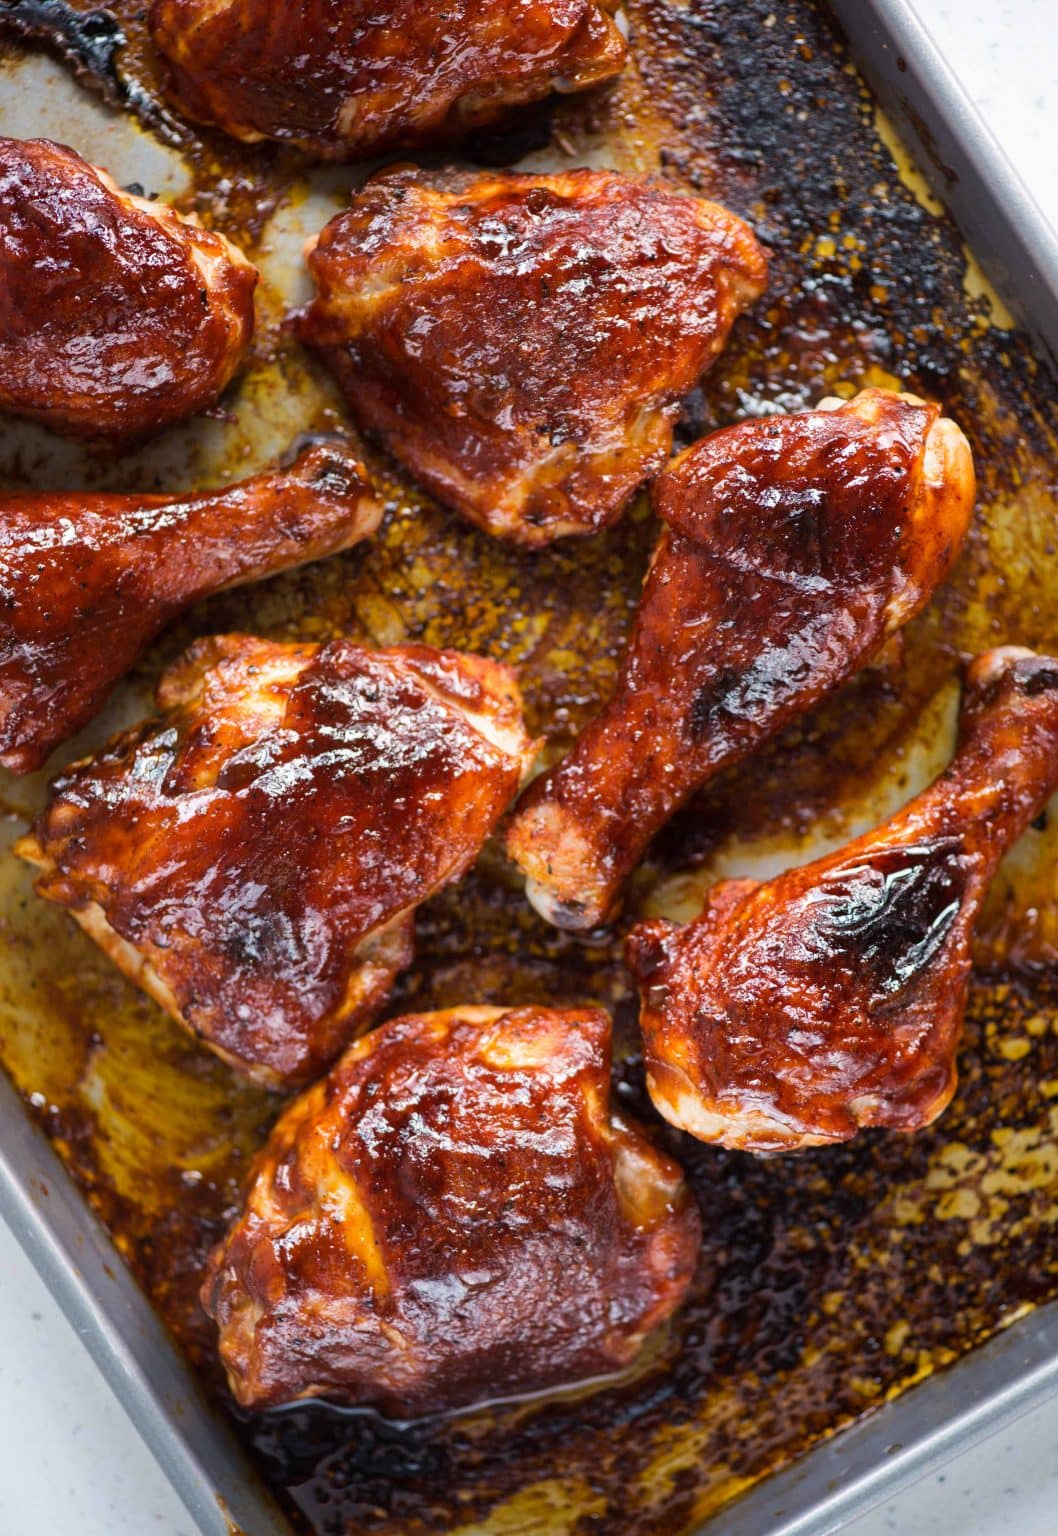 Baked BBQ Chicken - The flavours of kitchen